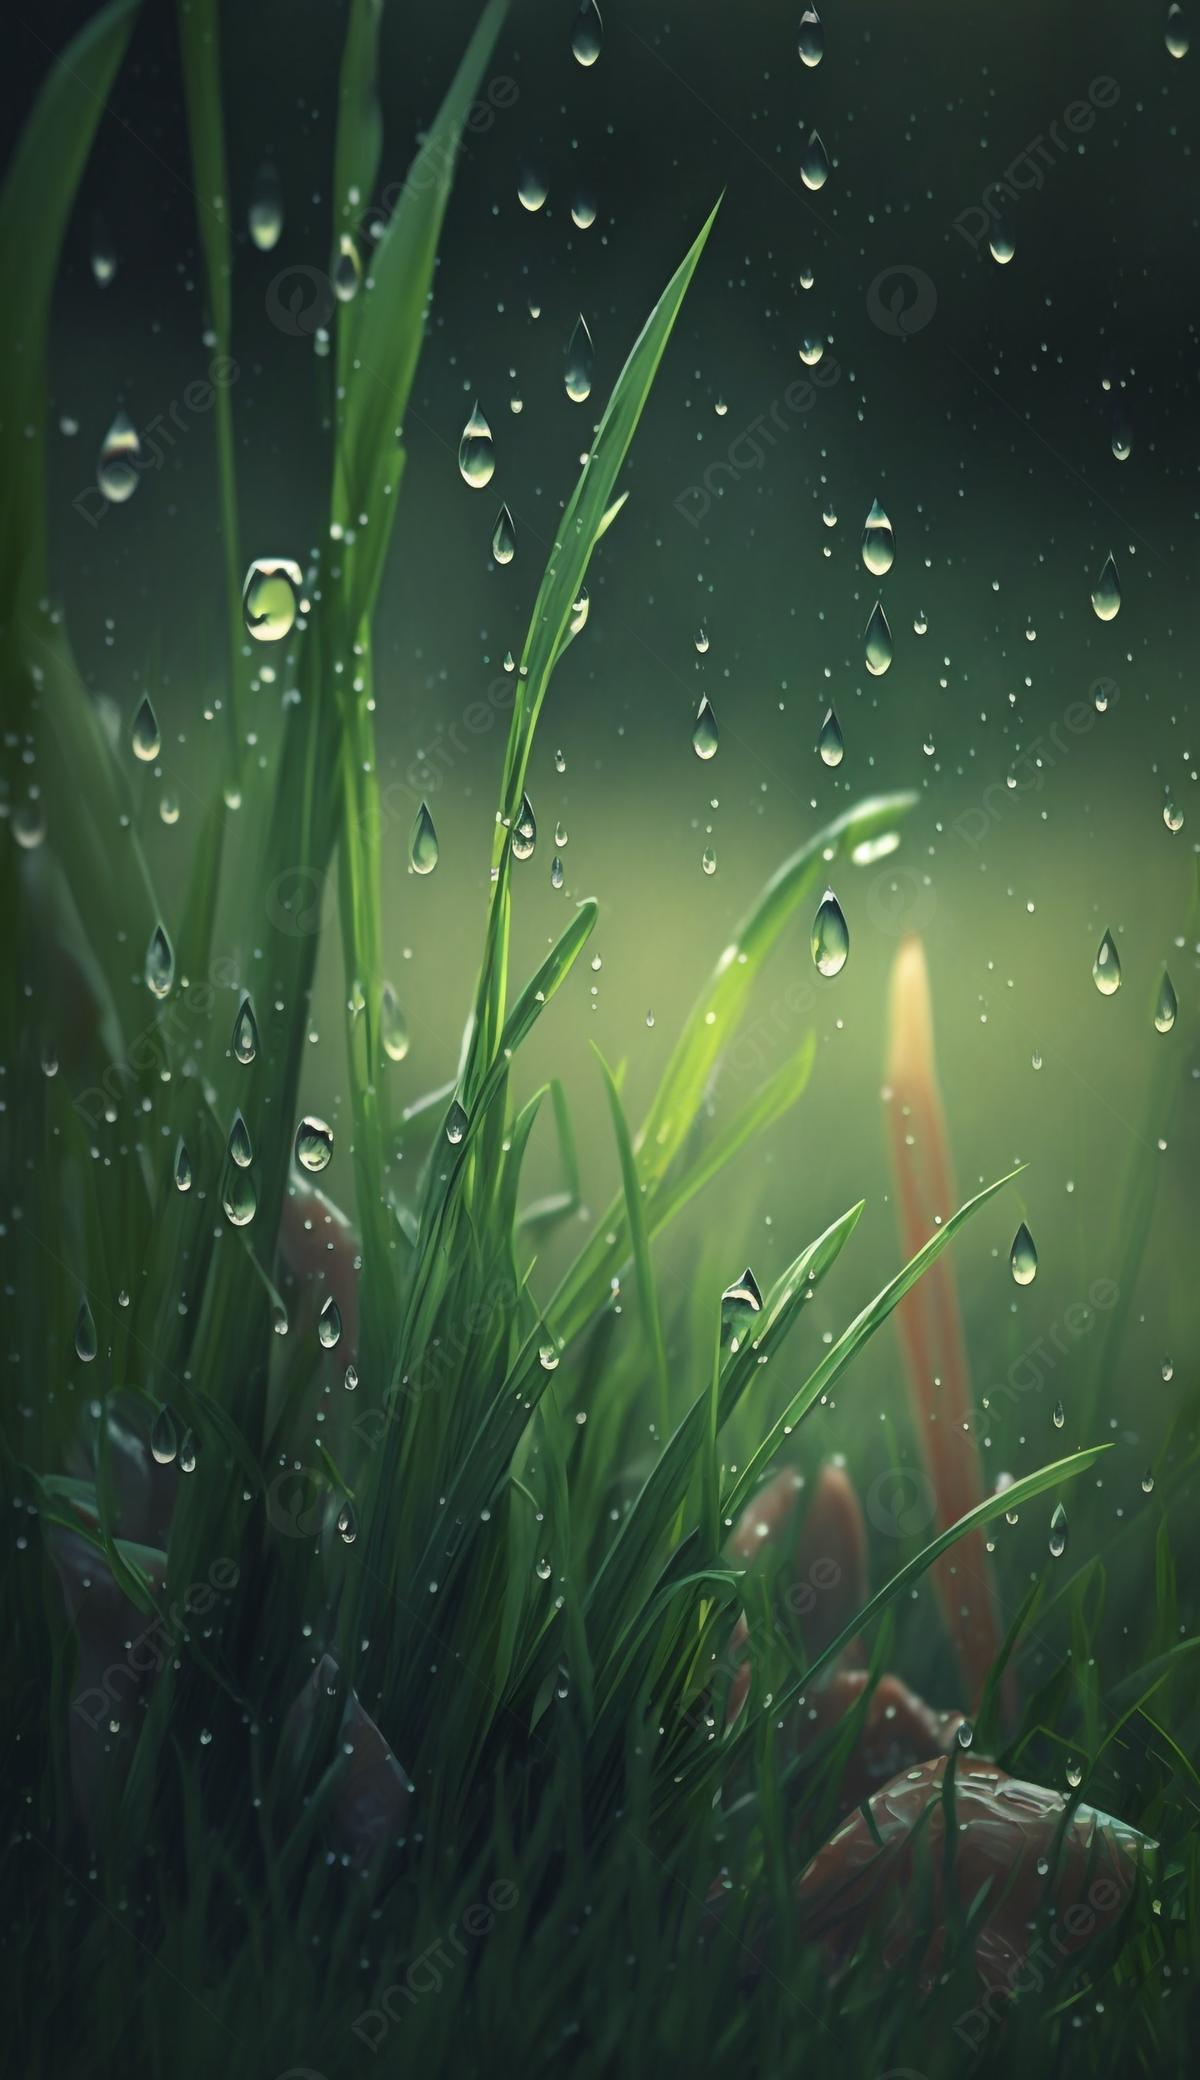 Spring Background With Raindrops